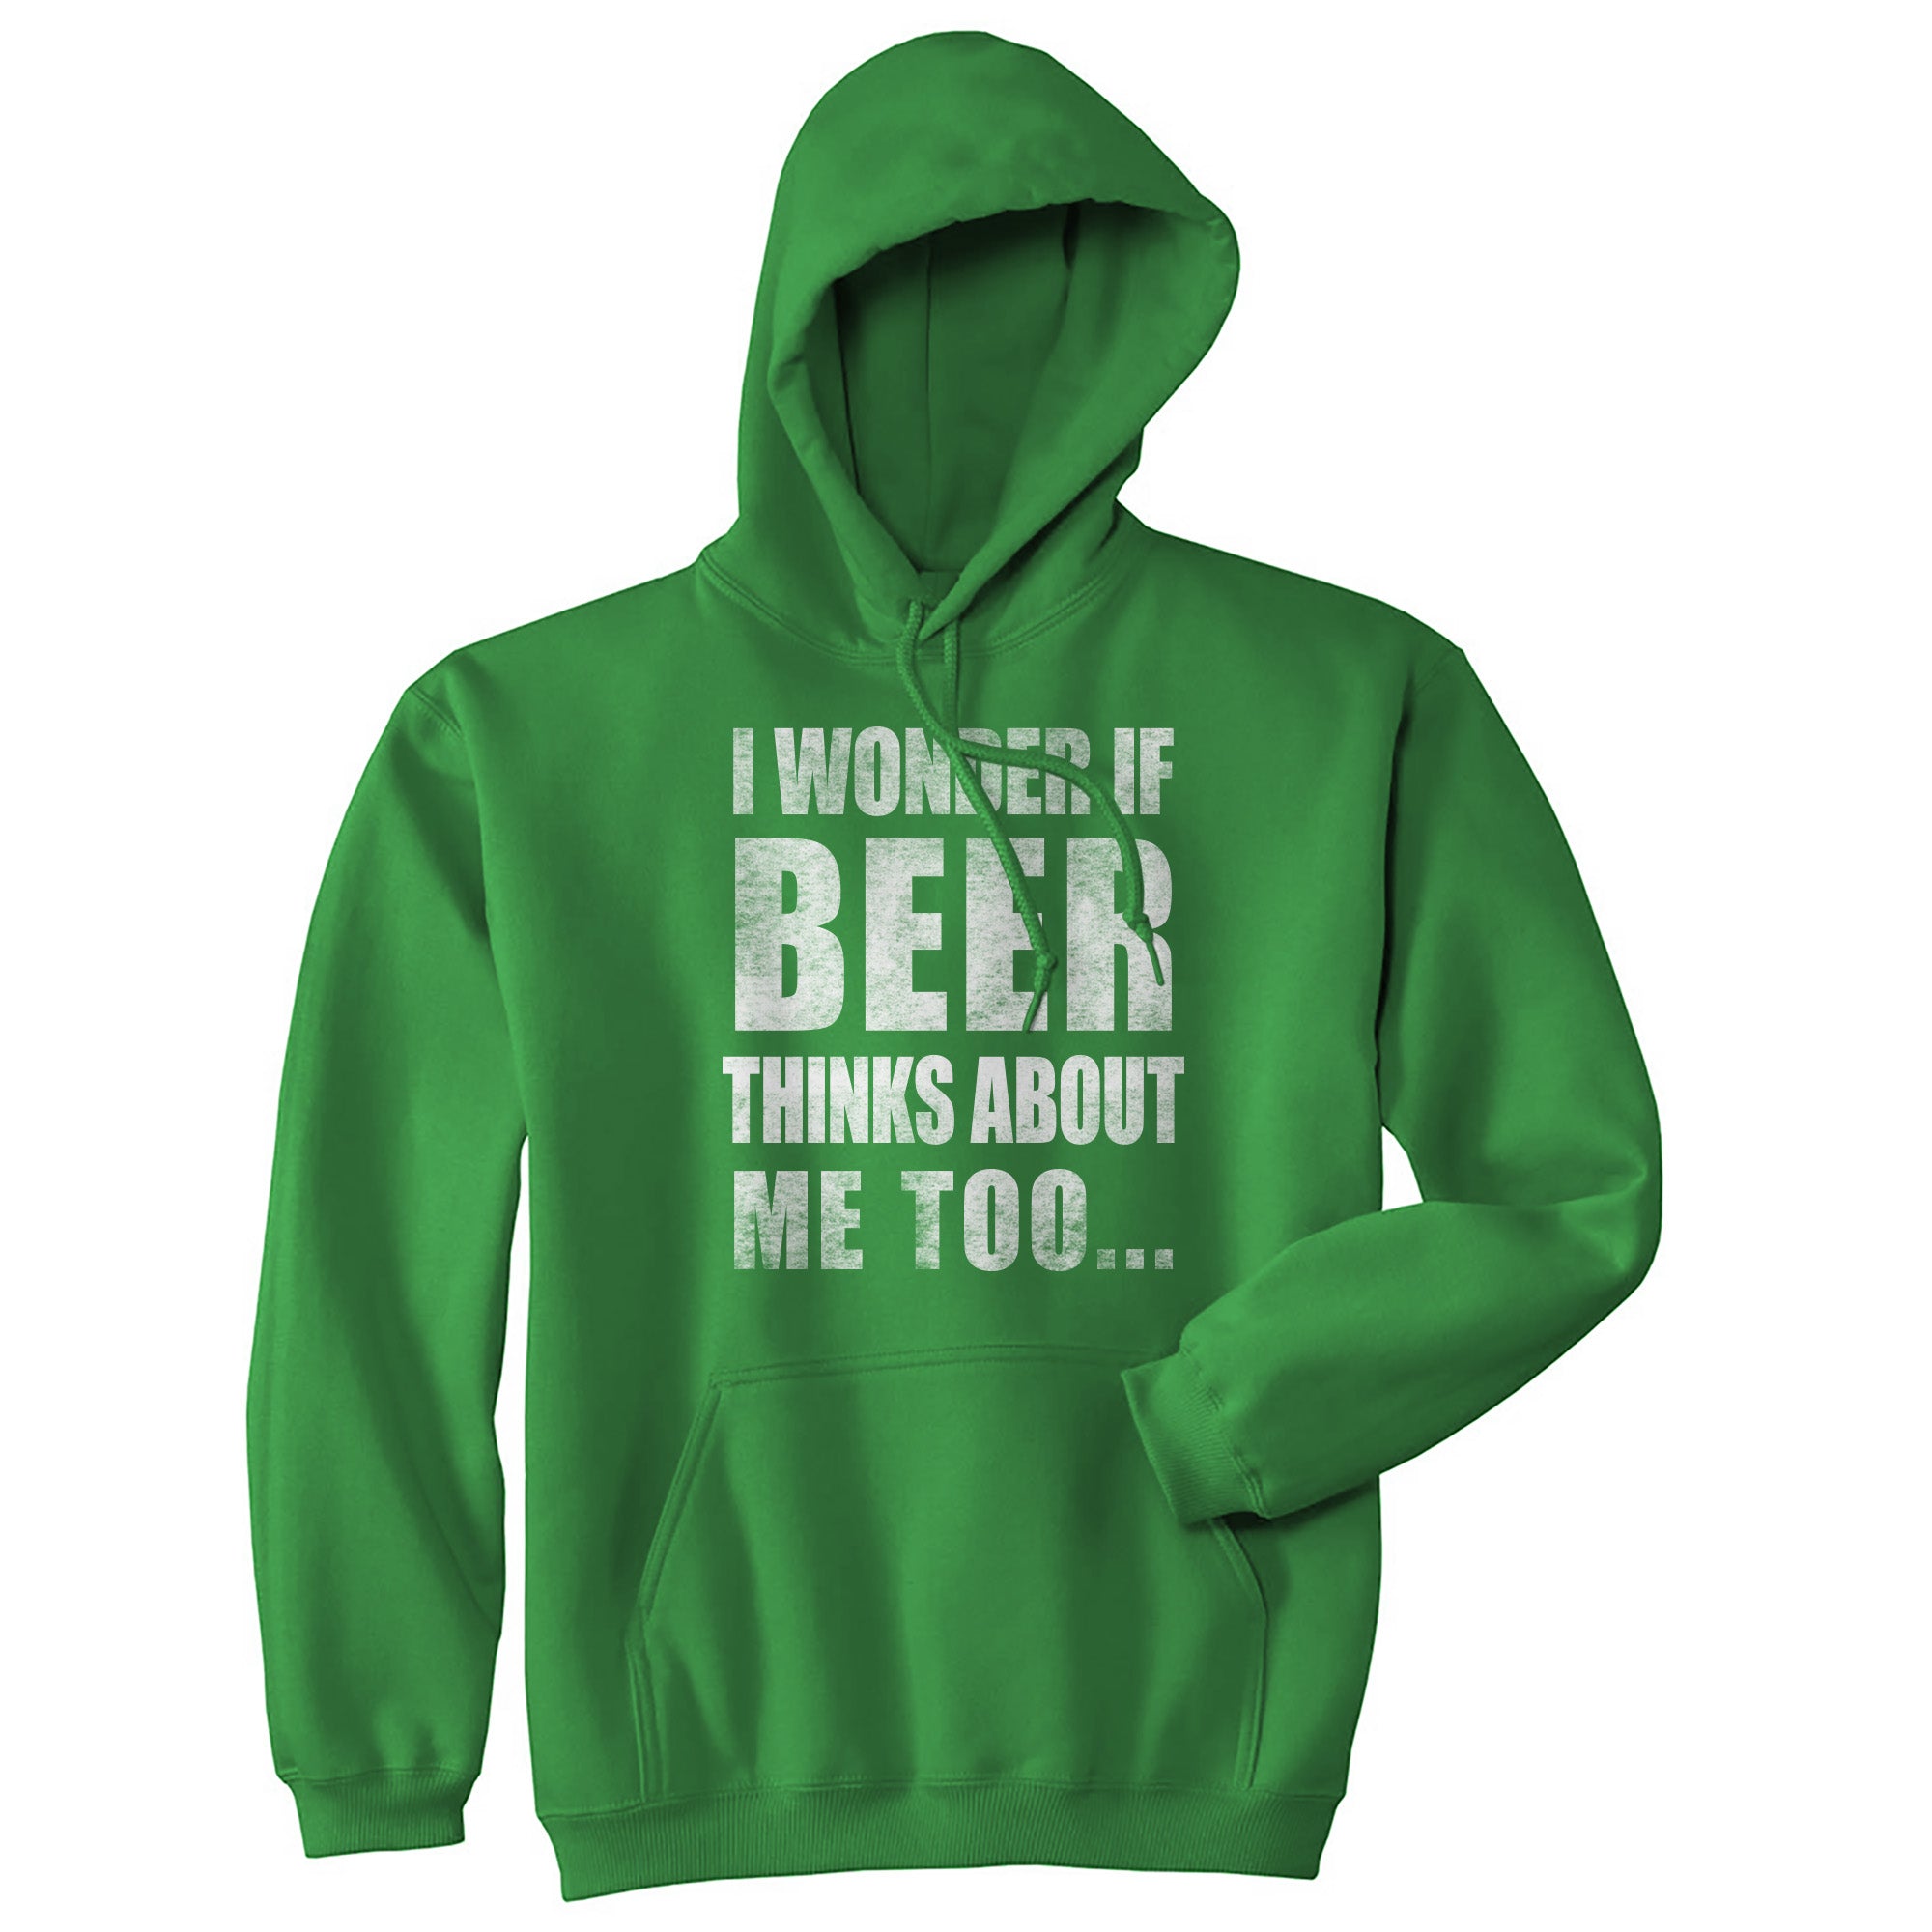 Funny Green I Wonder If Beer Thinks About Me Too Hoodie Nerdy Saint Patrick's Day Drinking Tee